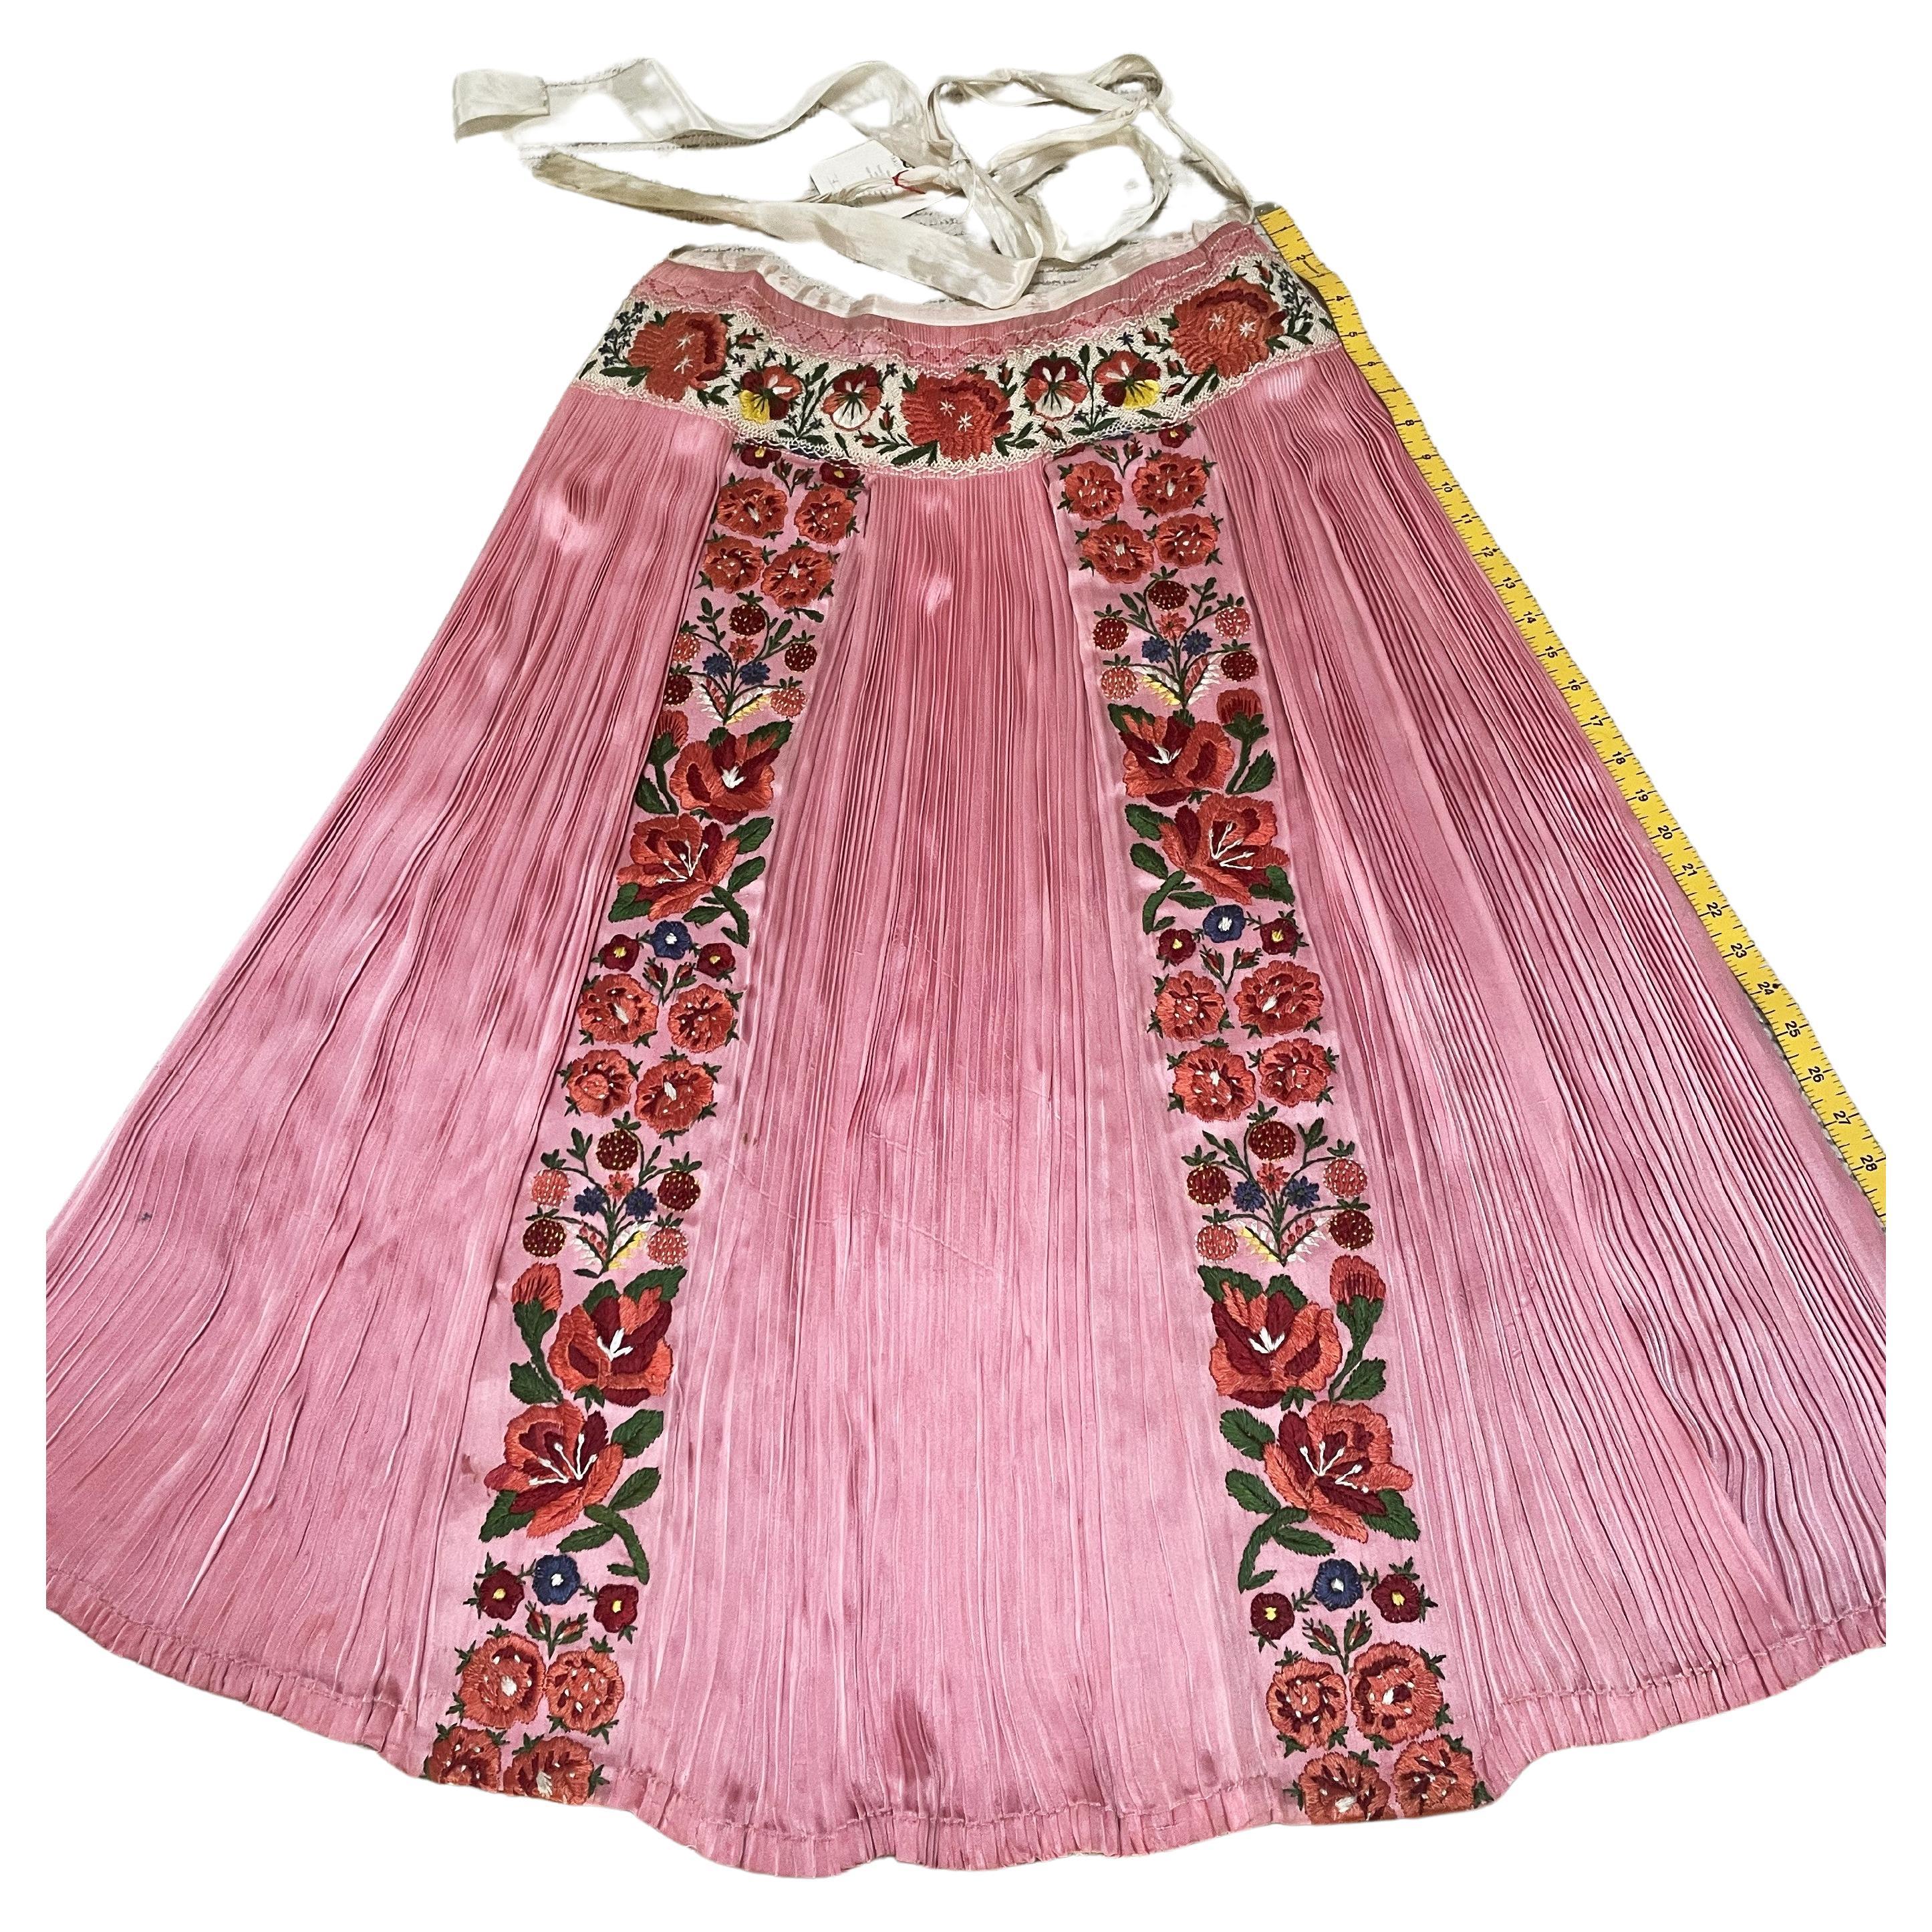 Hungarian traditional Apron, embroiderd by hand in the 1950s, Hungary